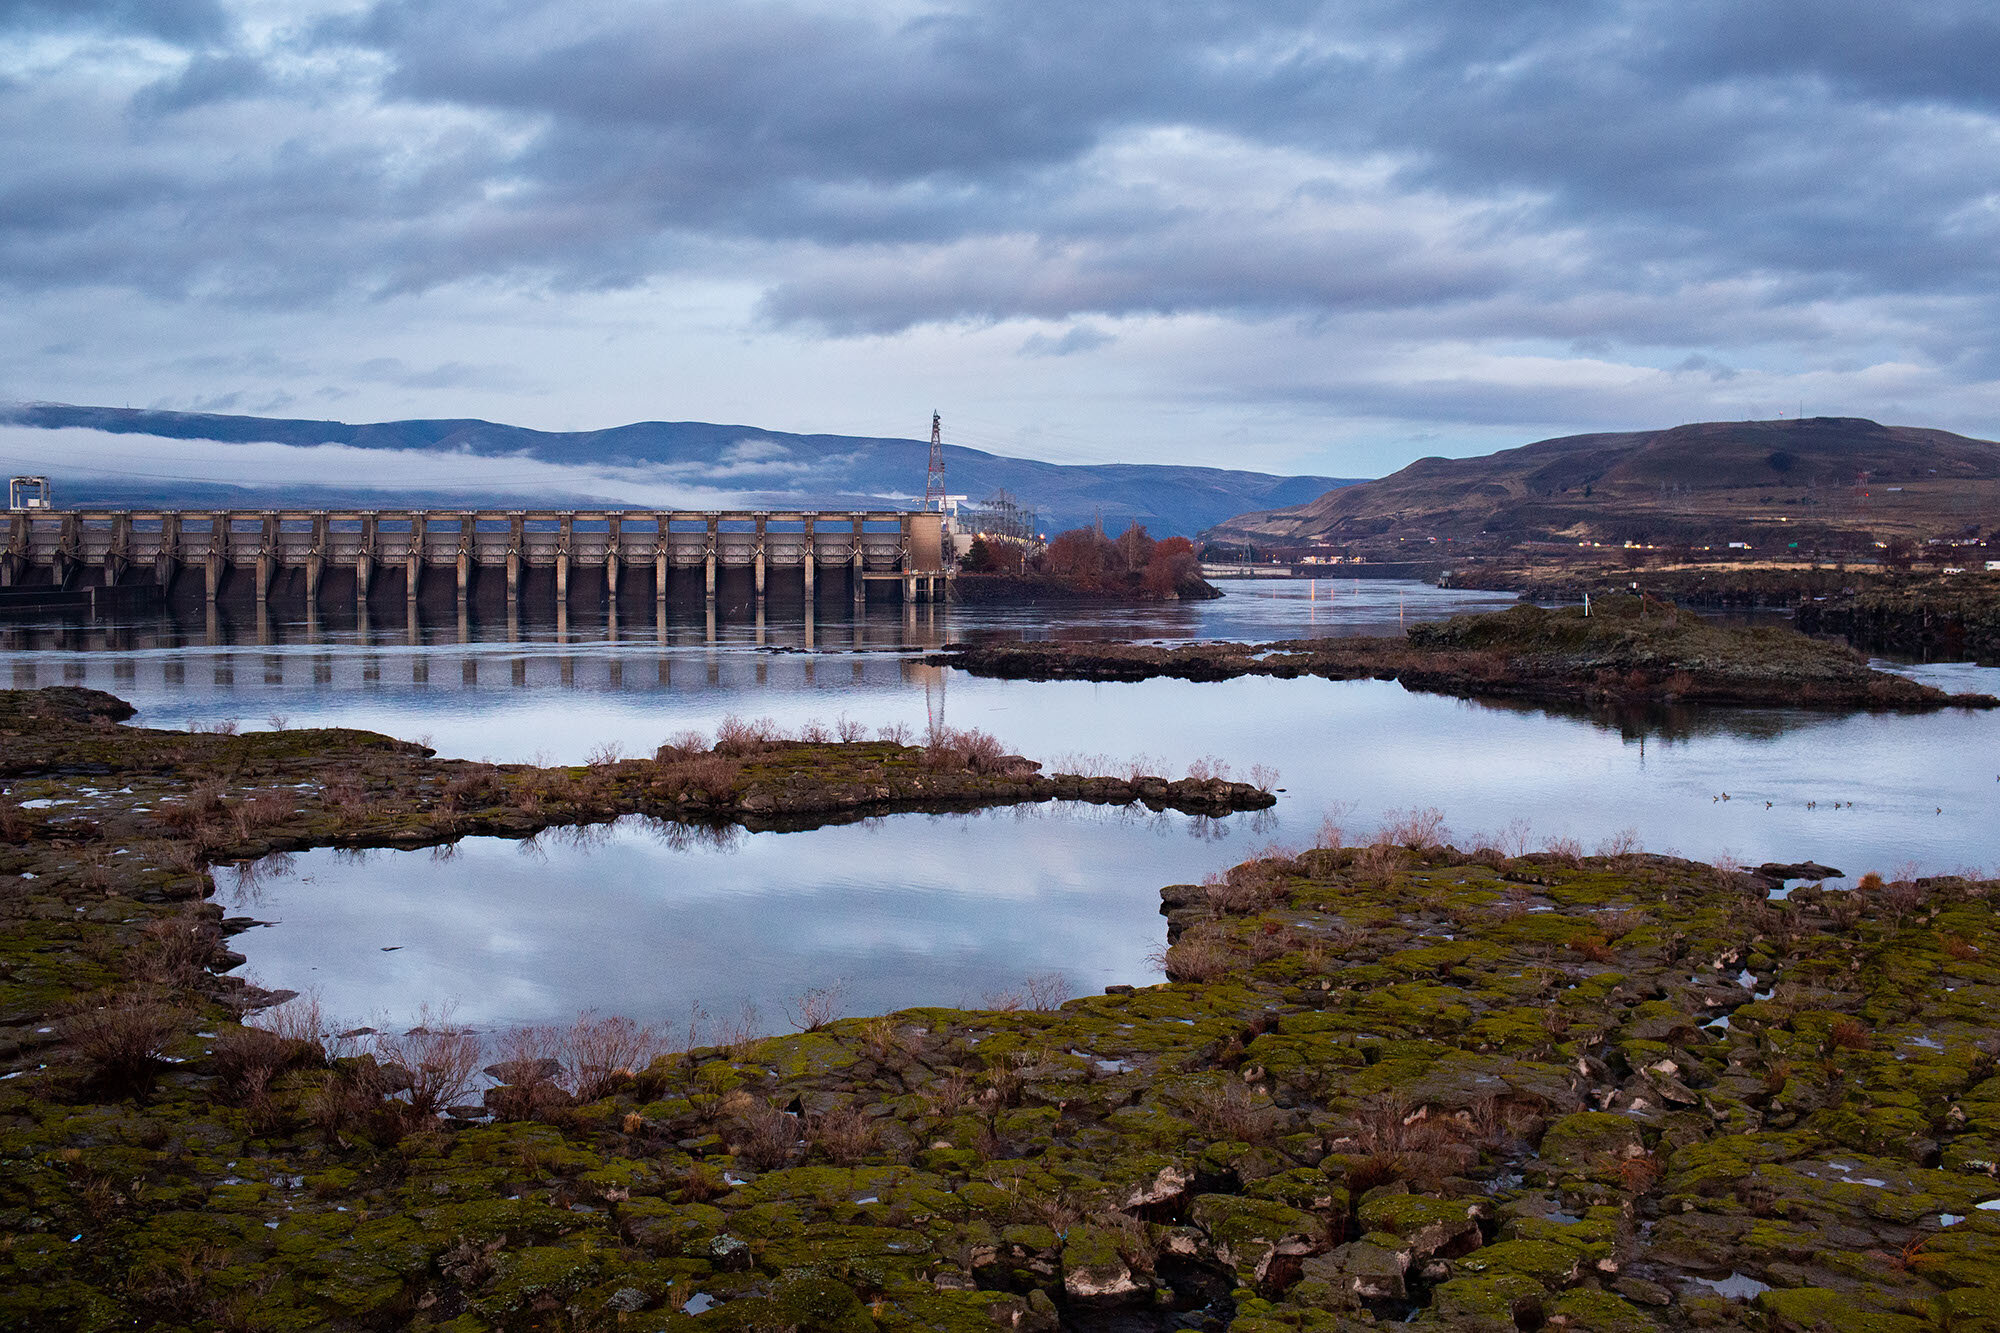 The Dalles Dam for The New York Times